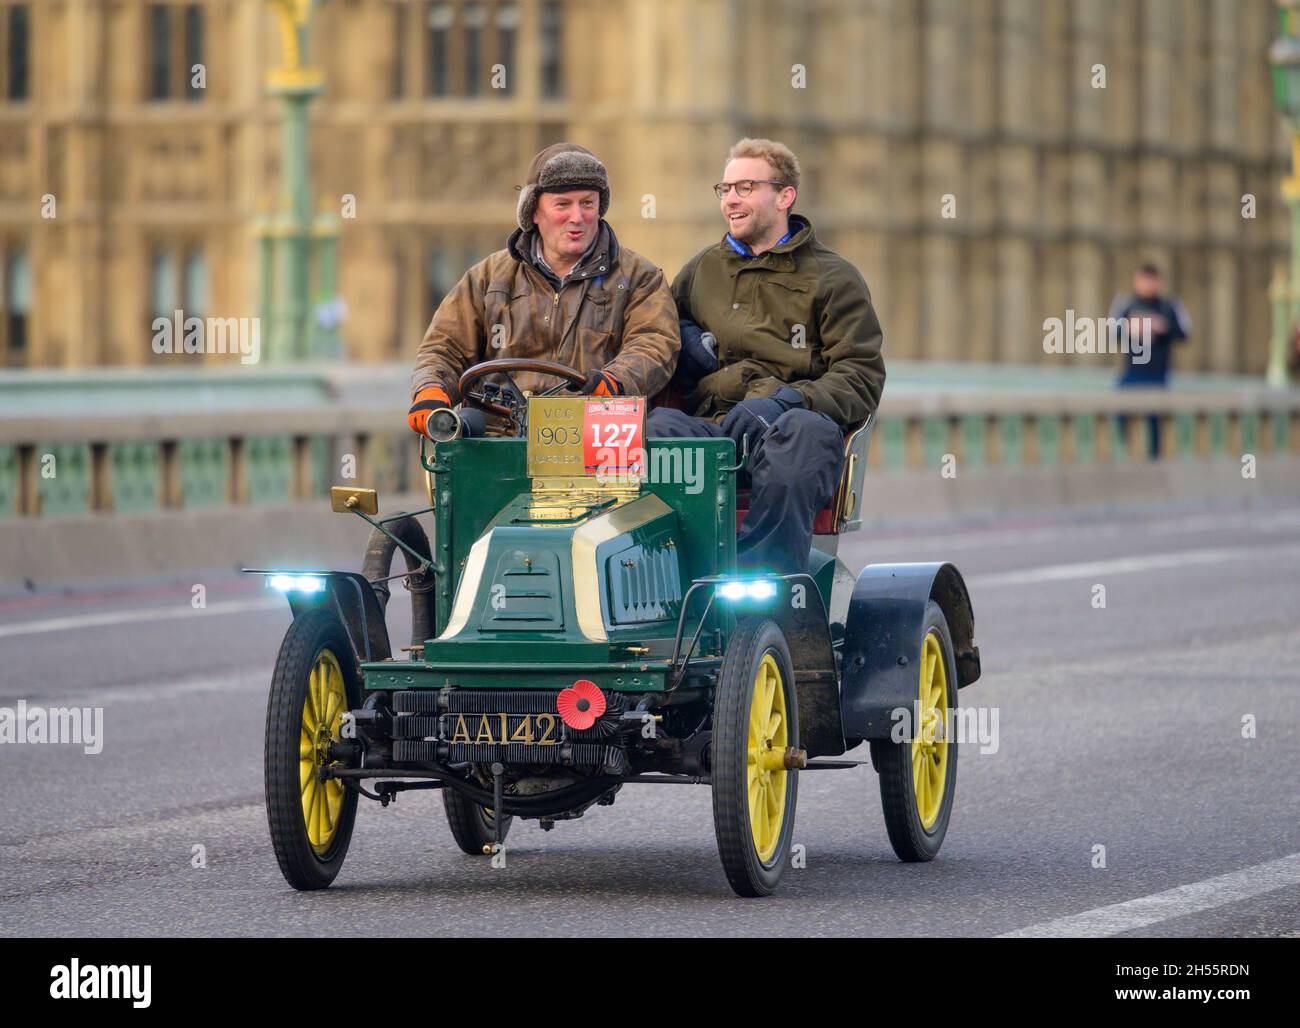 Westminster, London, UK. 7 November 2021. The World’s longest running motoring event, RM Sotheby’s London to Brighton veteran car run, leaves central London via Westminster Bridge on its 125th Anniversary year. The cars started from Hyde Park, with oldest vehicles in date order beginning the run at sunrise. Credit: Malcolm Park/Alamy Live News. Stock Photo